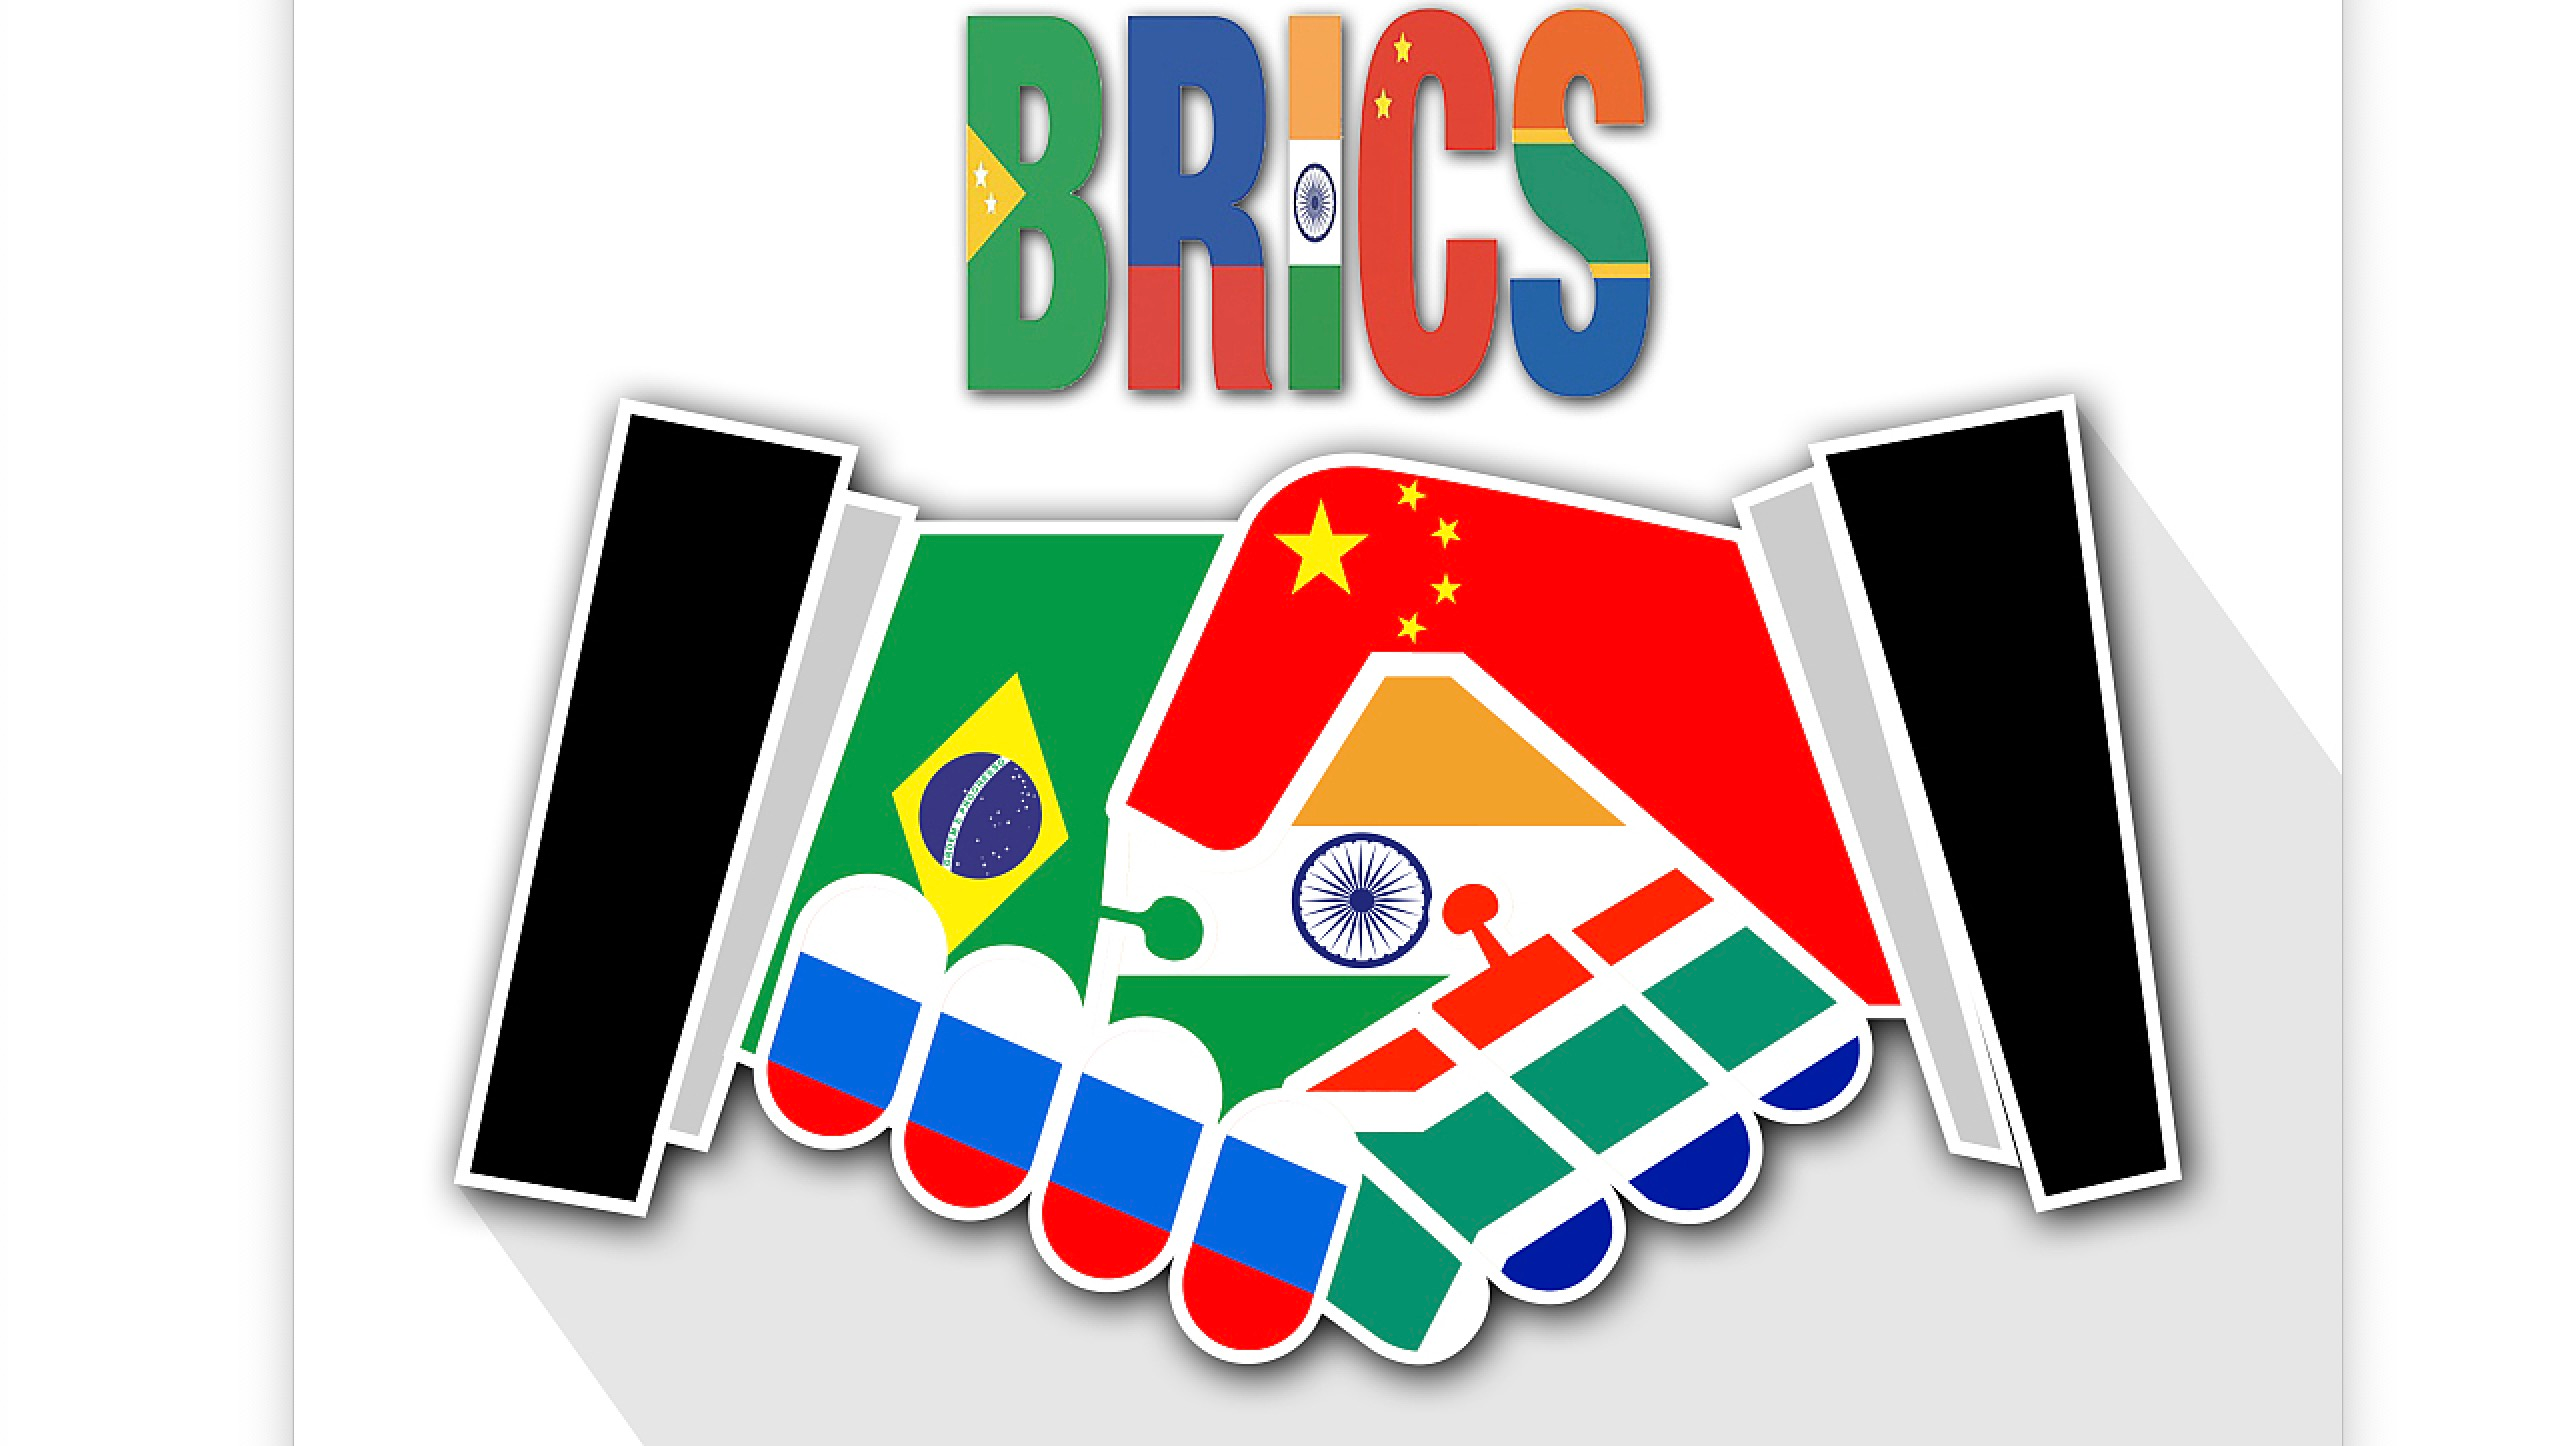 Sign of BRICS which groups five emerging economies of Brazil, Russia, India, China and South Africa. /CFP